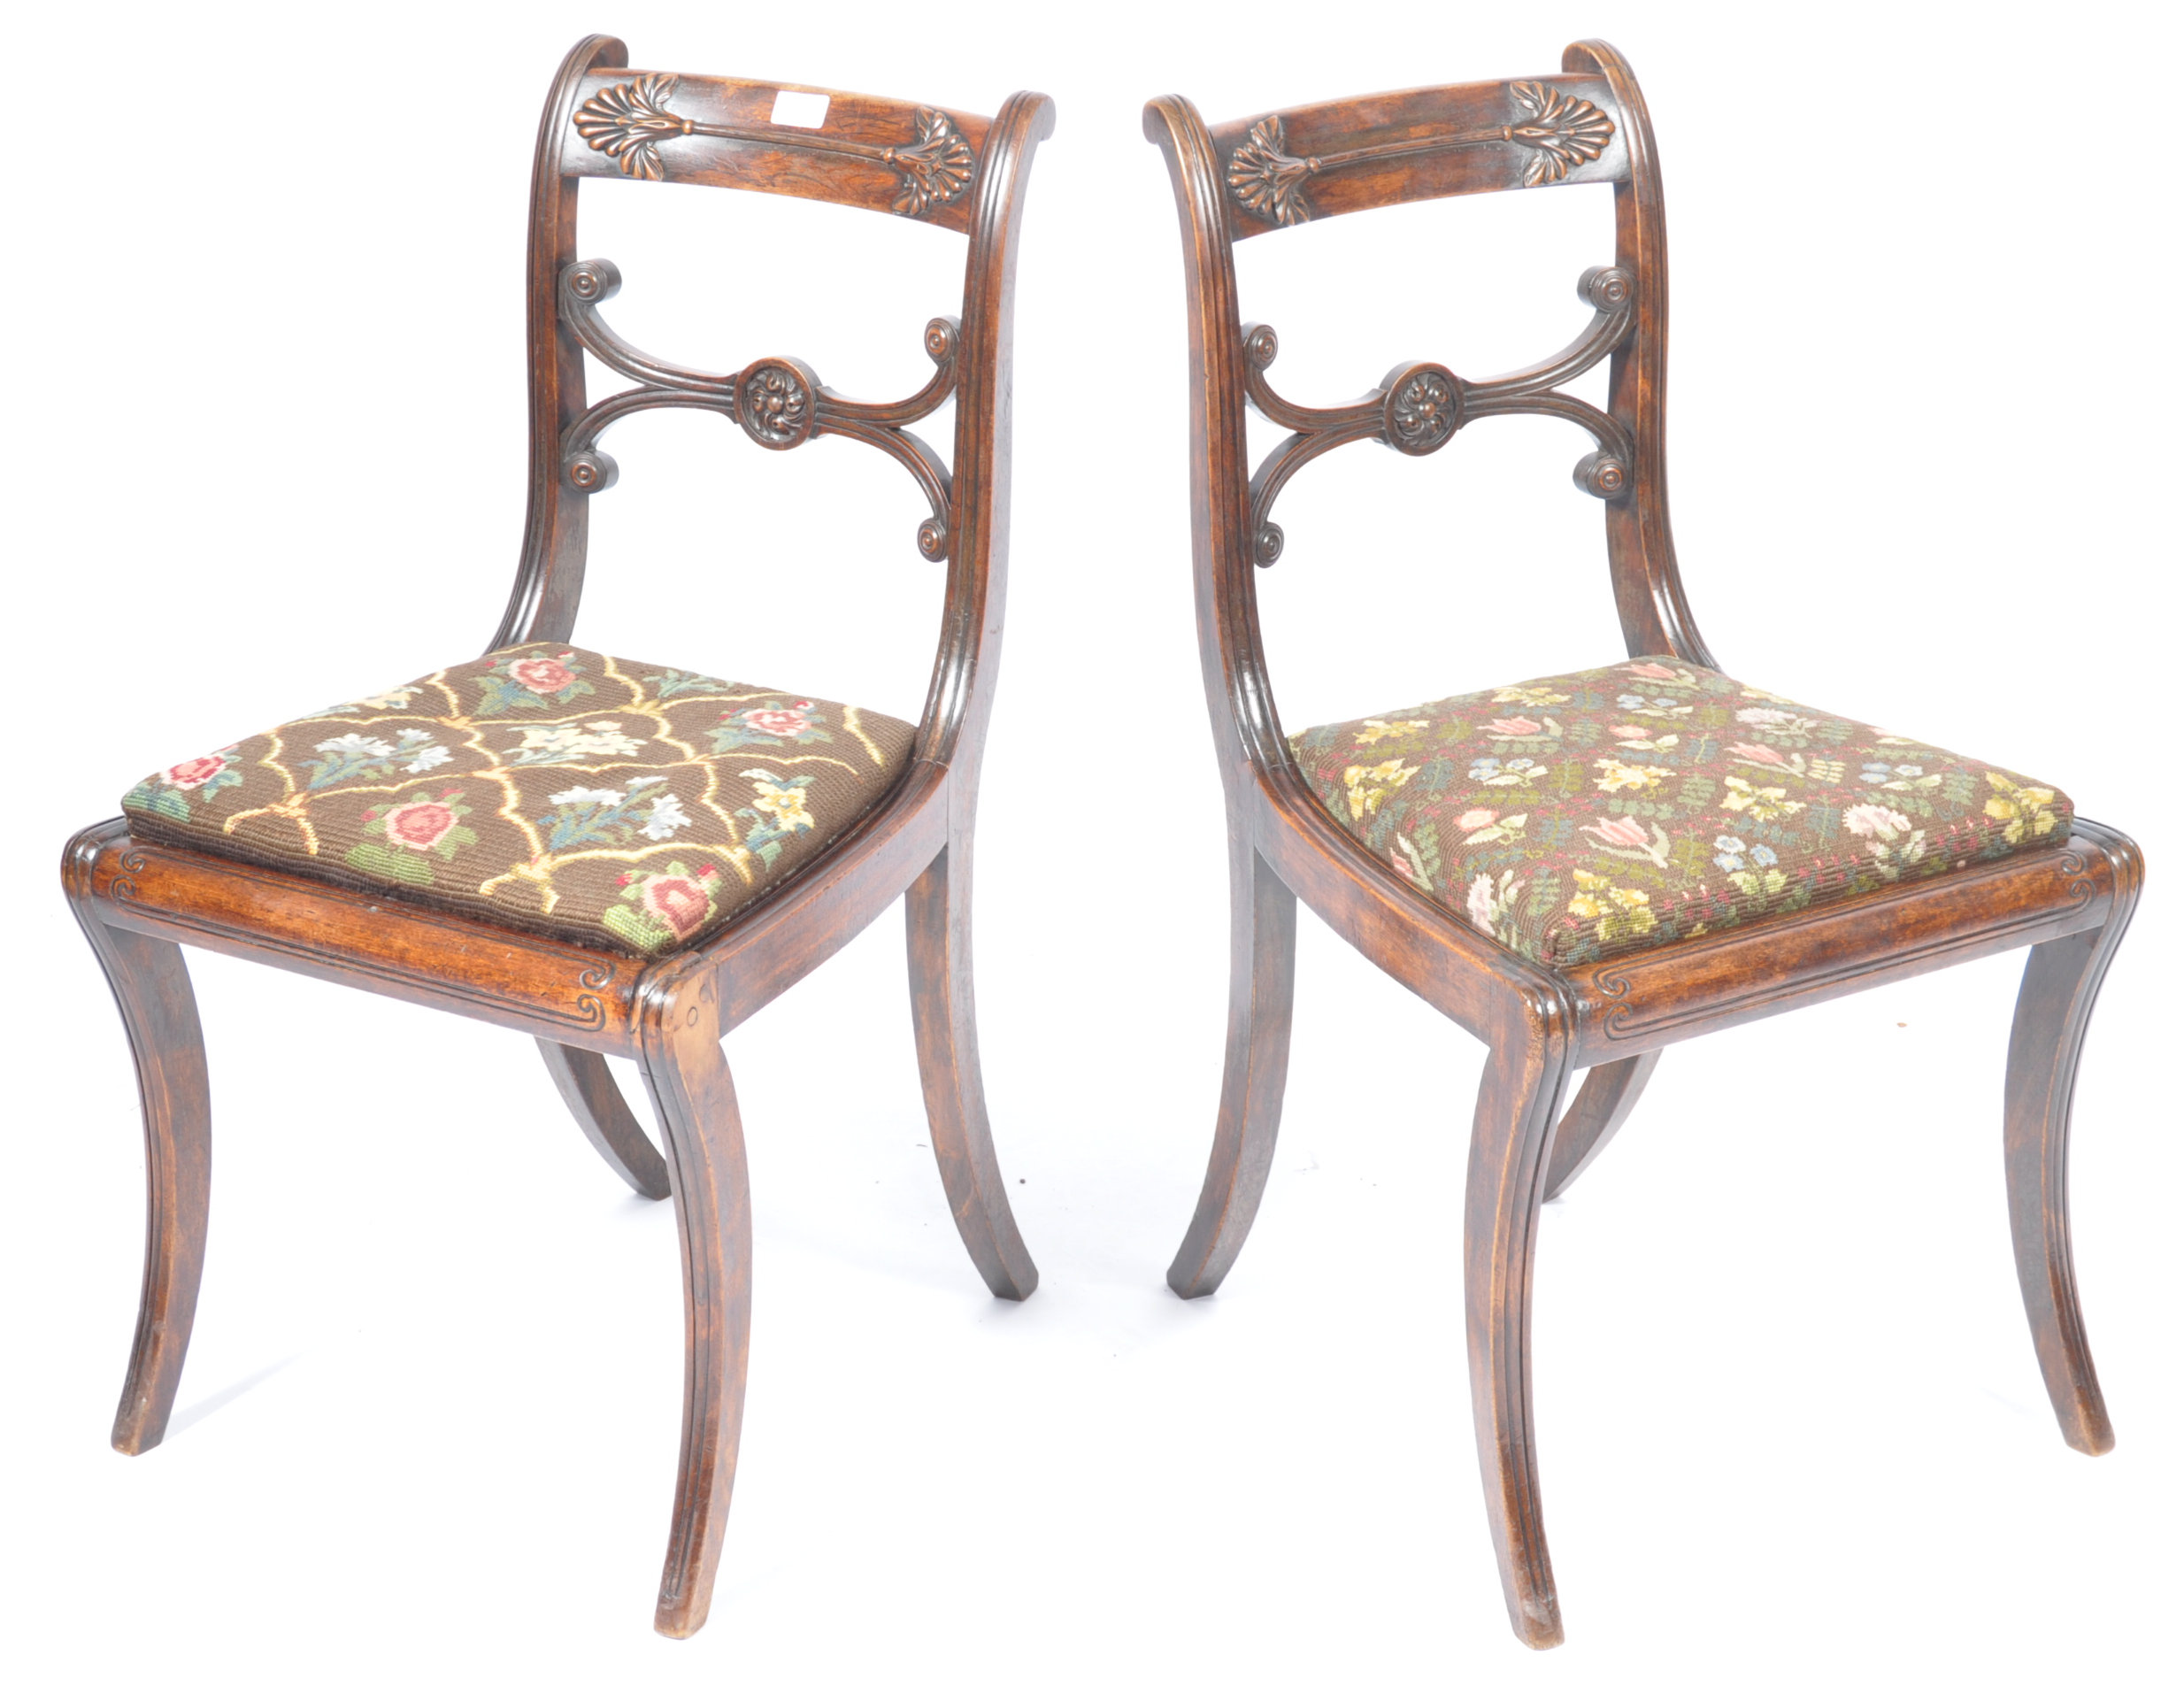 PAIR OF GILLOWS MANNER REGENCY SIDE CHAIRS - Image 2 of 9